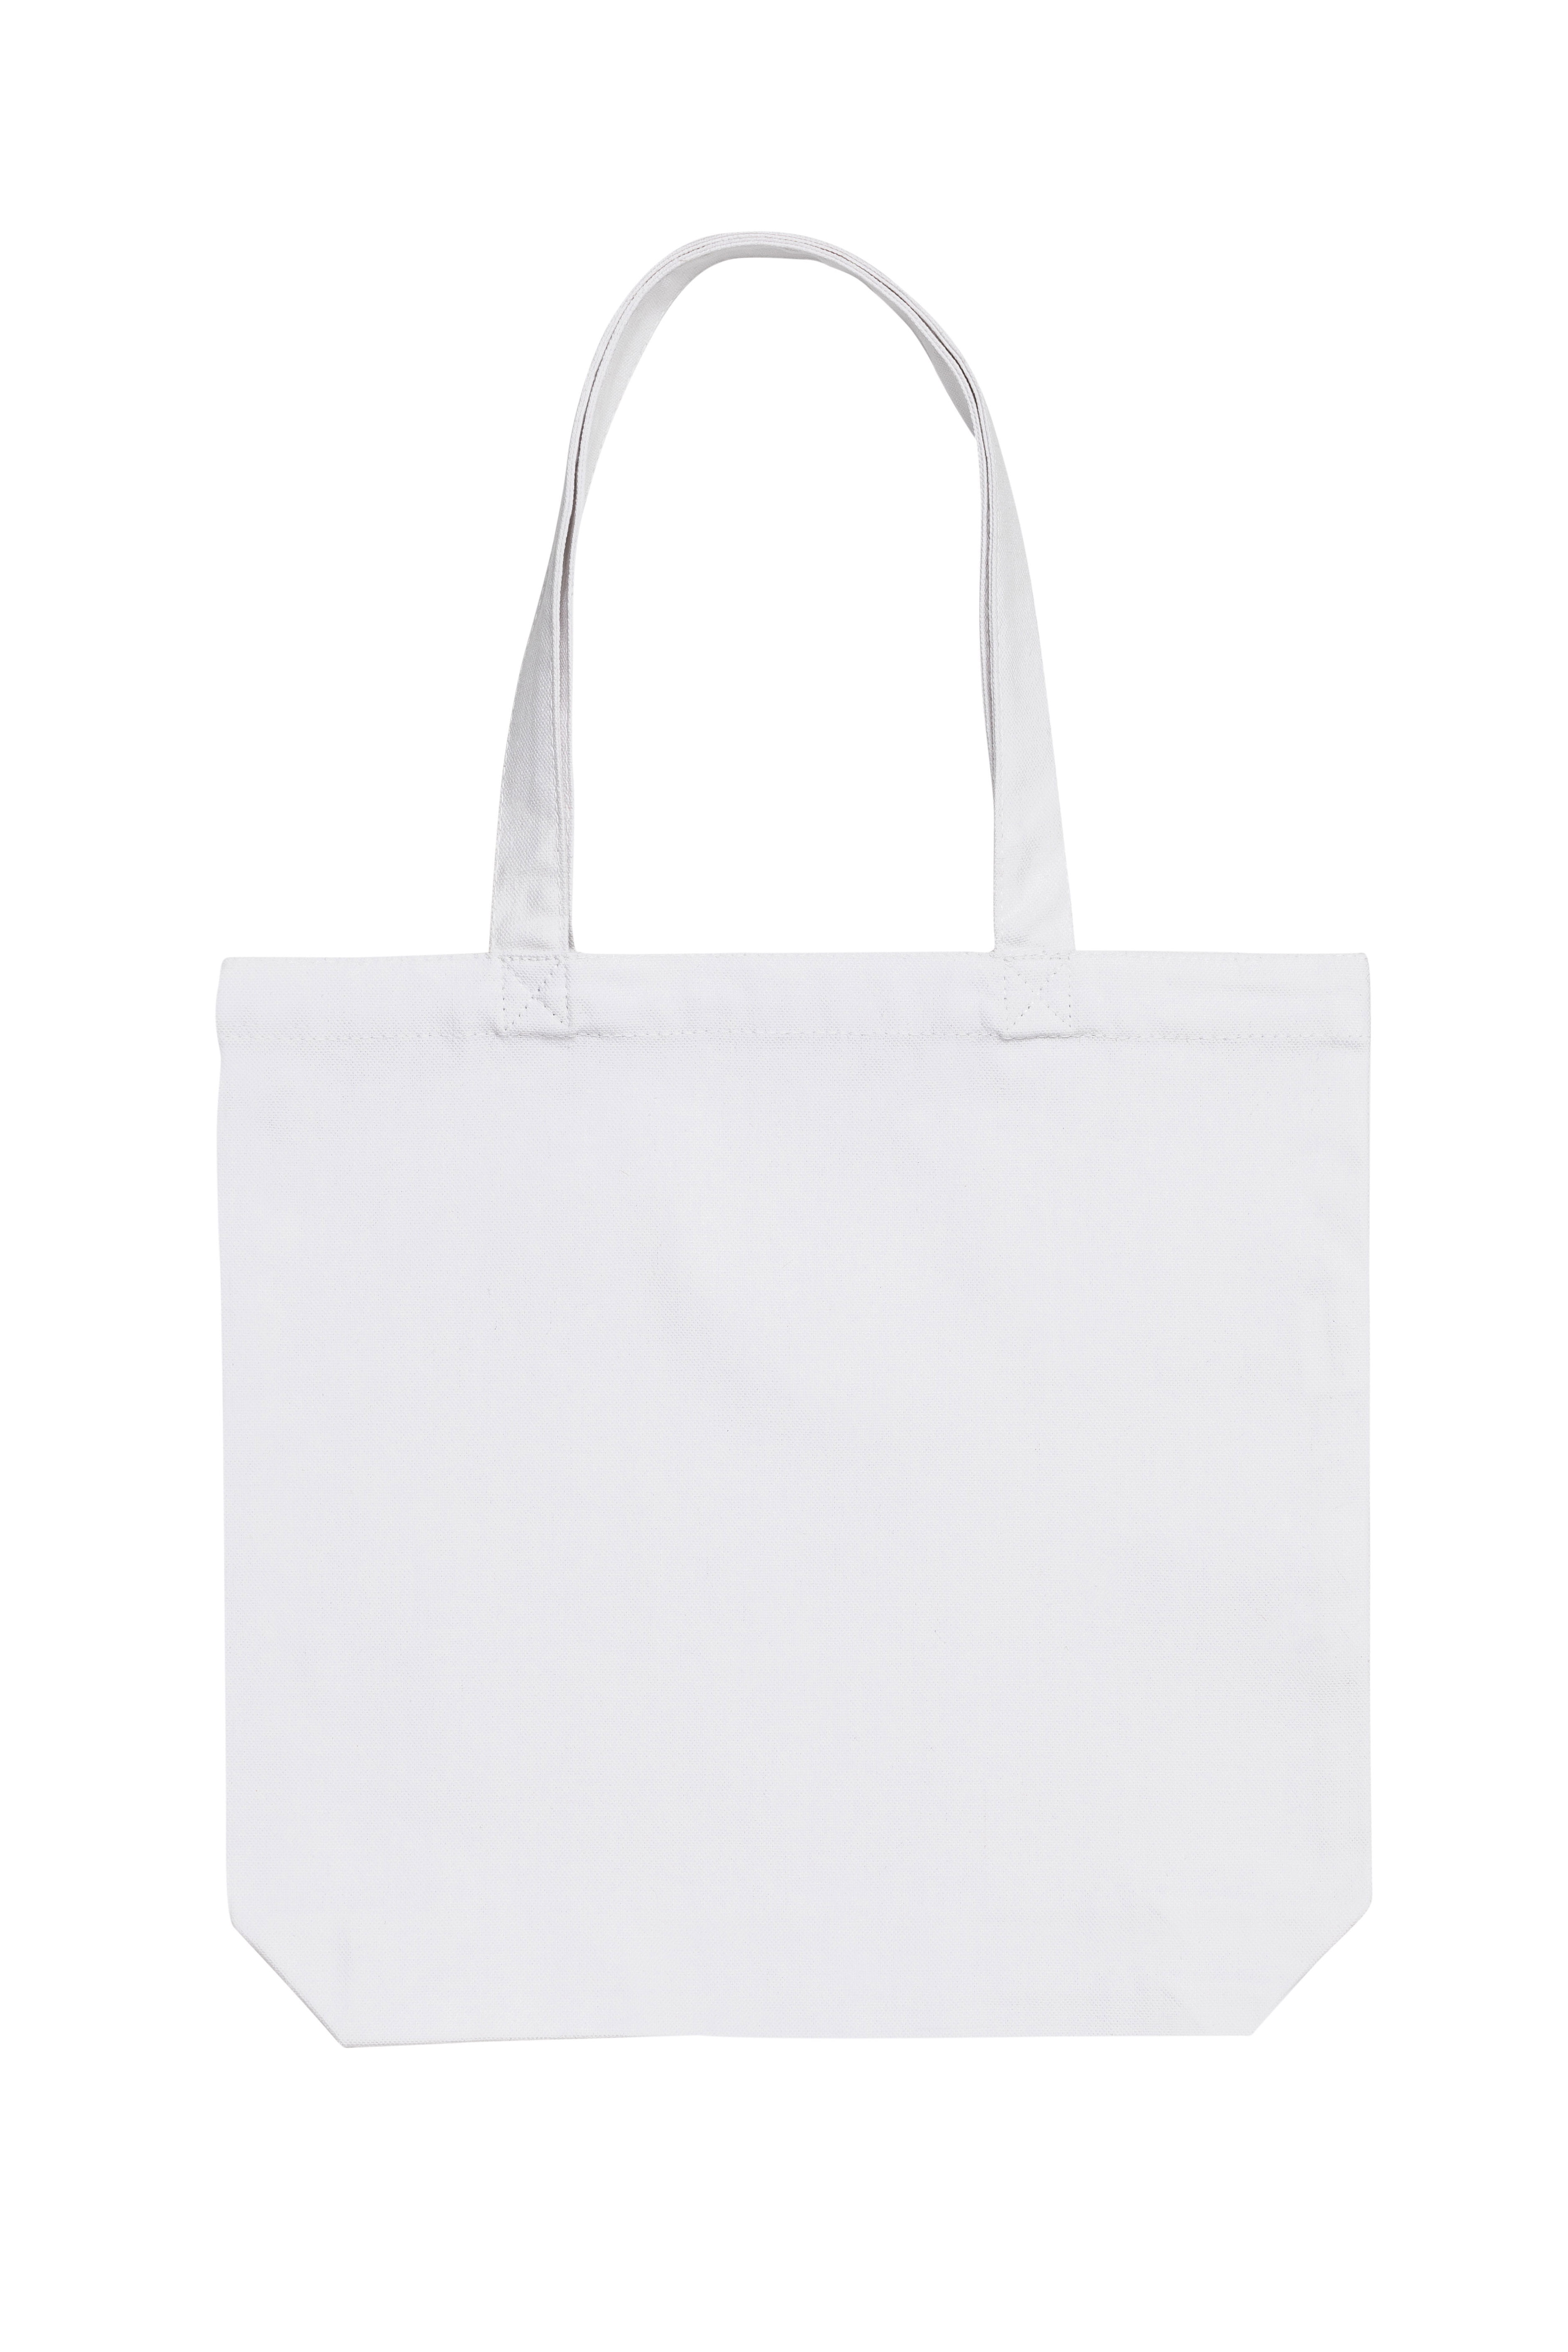 Shopping & DIY Crafts White 100% Cotton Canvas Great for Party Favors 12 Pack Gift Bags Large Blank Cotton Tote Bags - 16” x 16” x 6” Natural Colors Black 